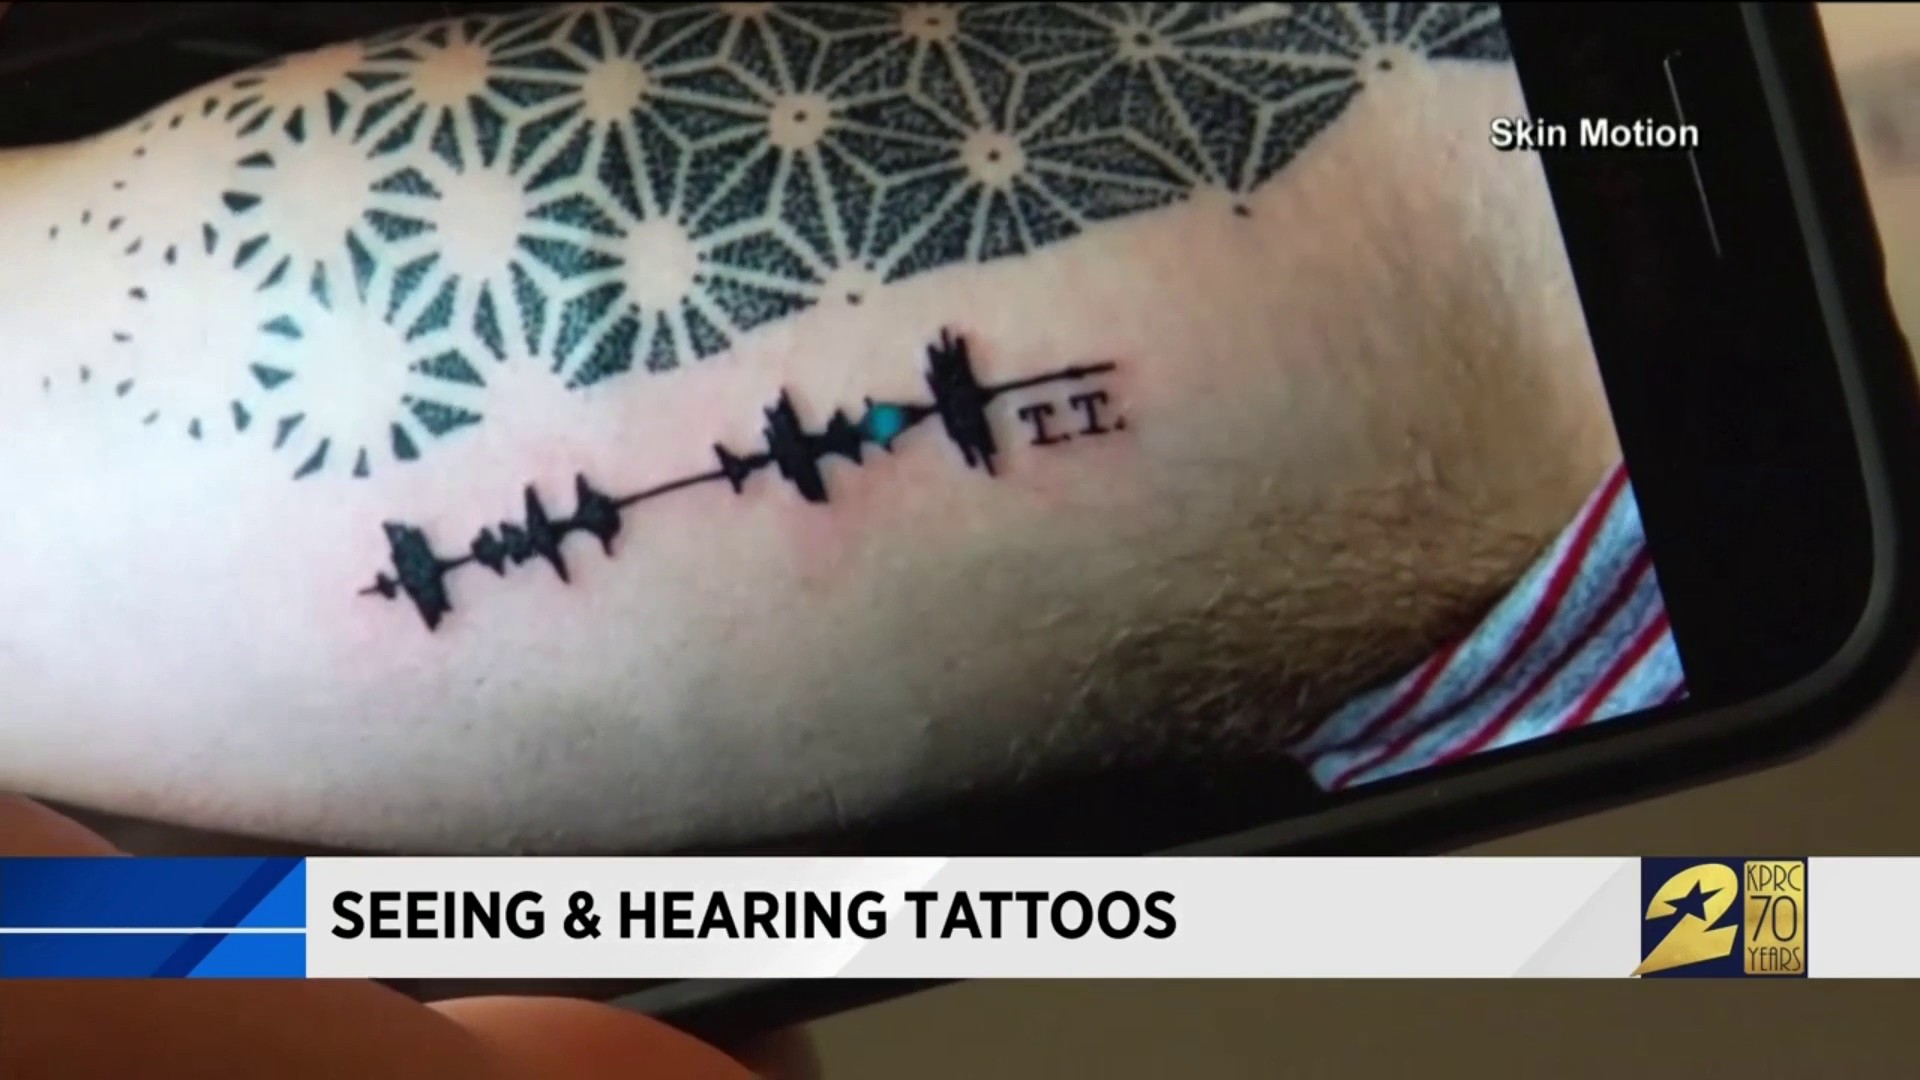 New wave tattoo trend brings sound to ink